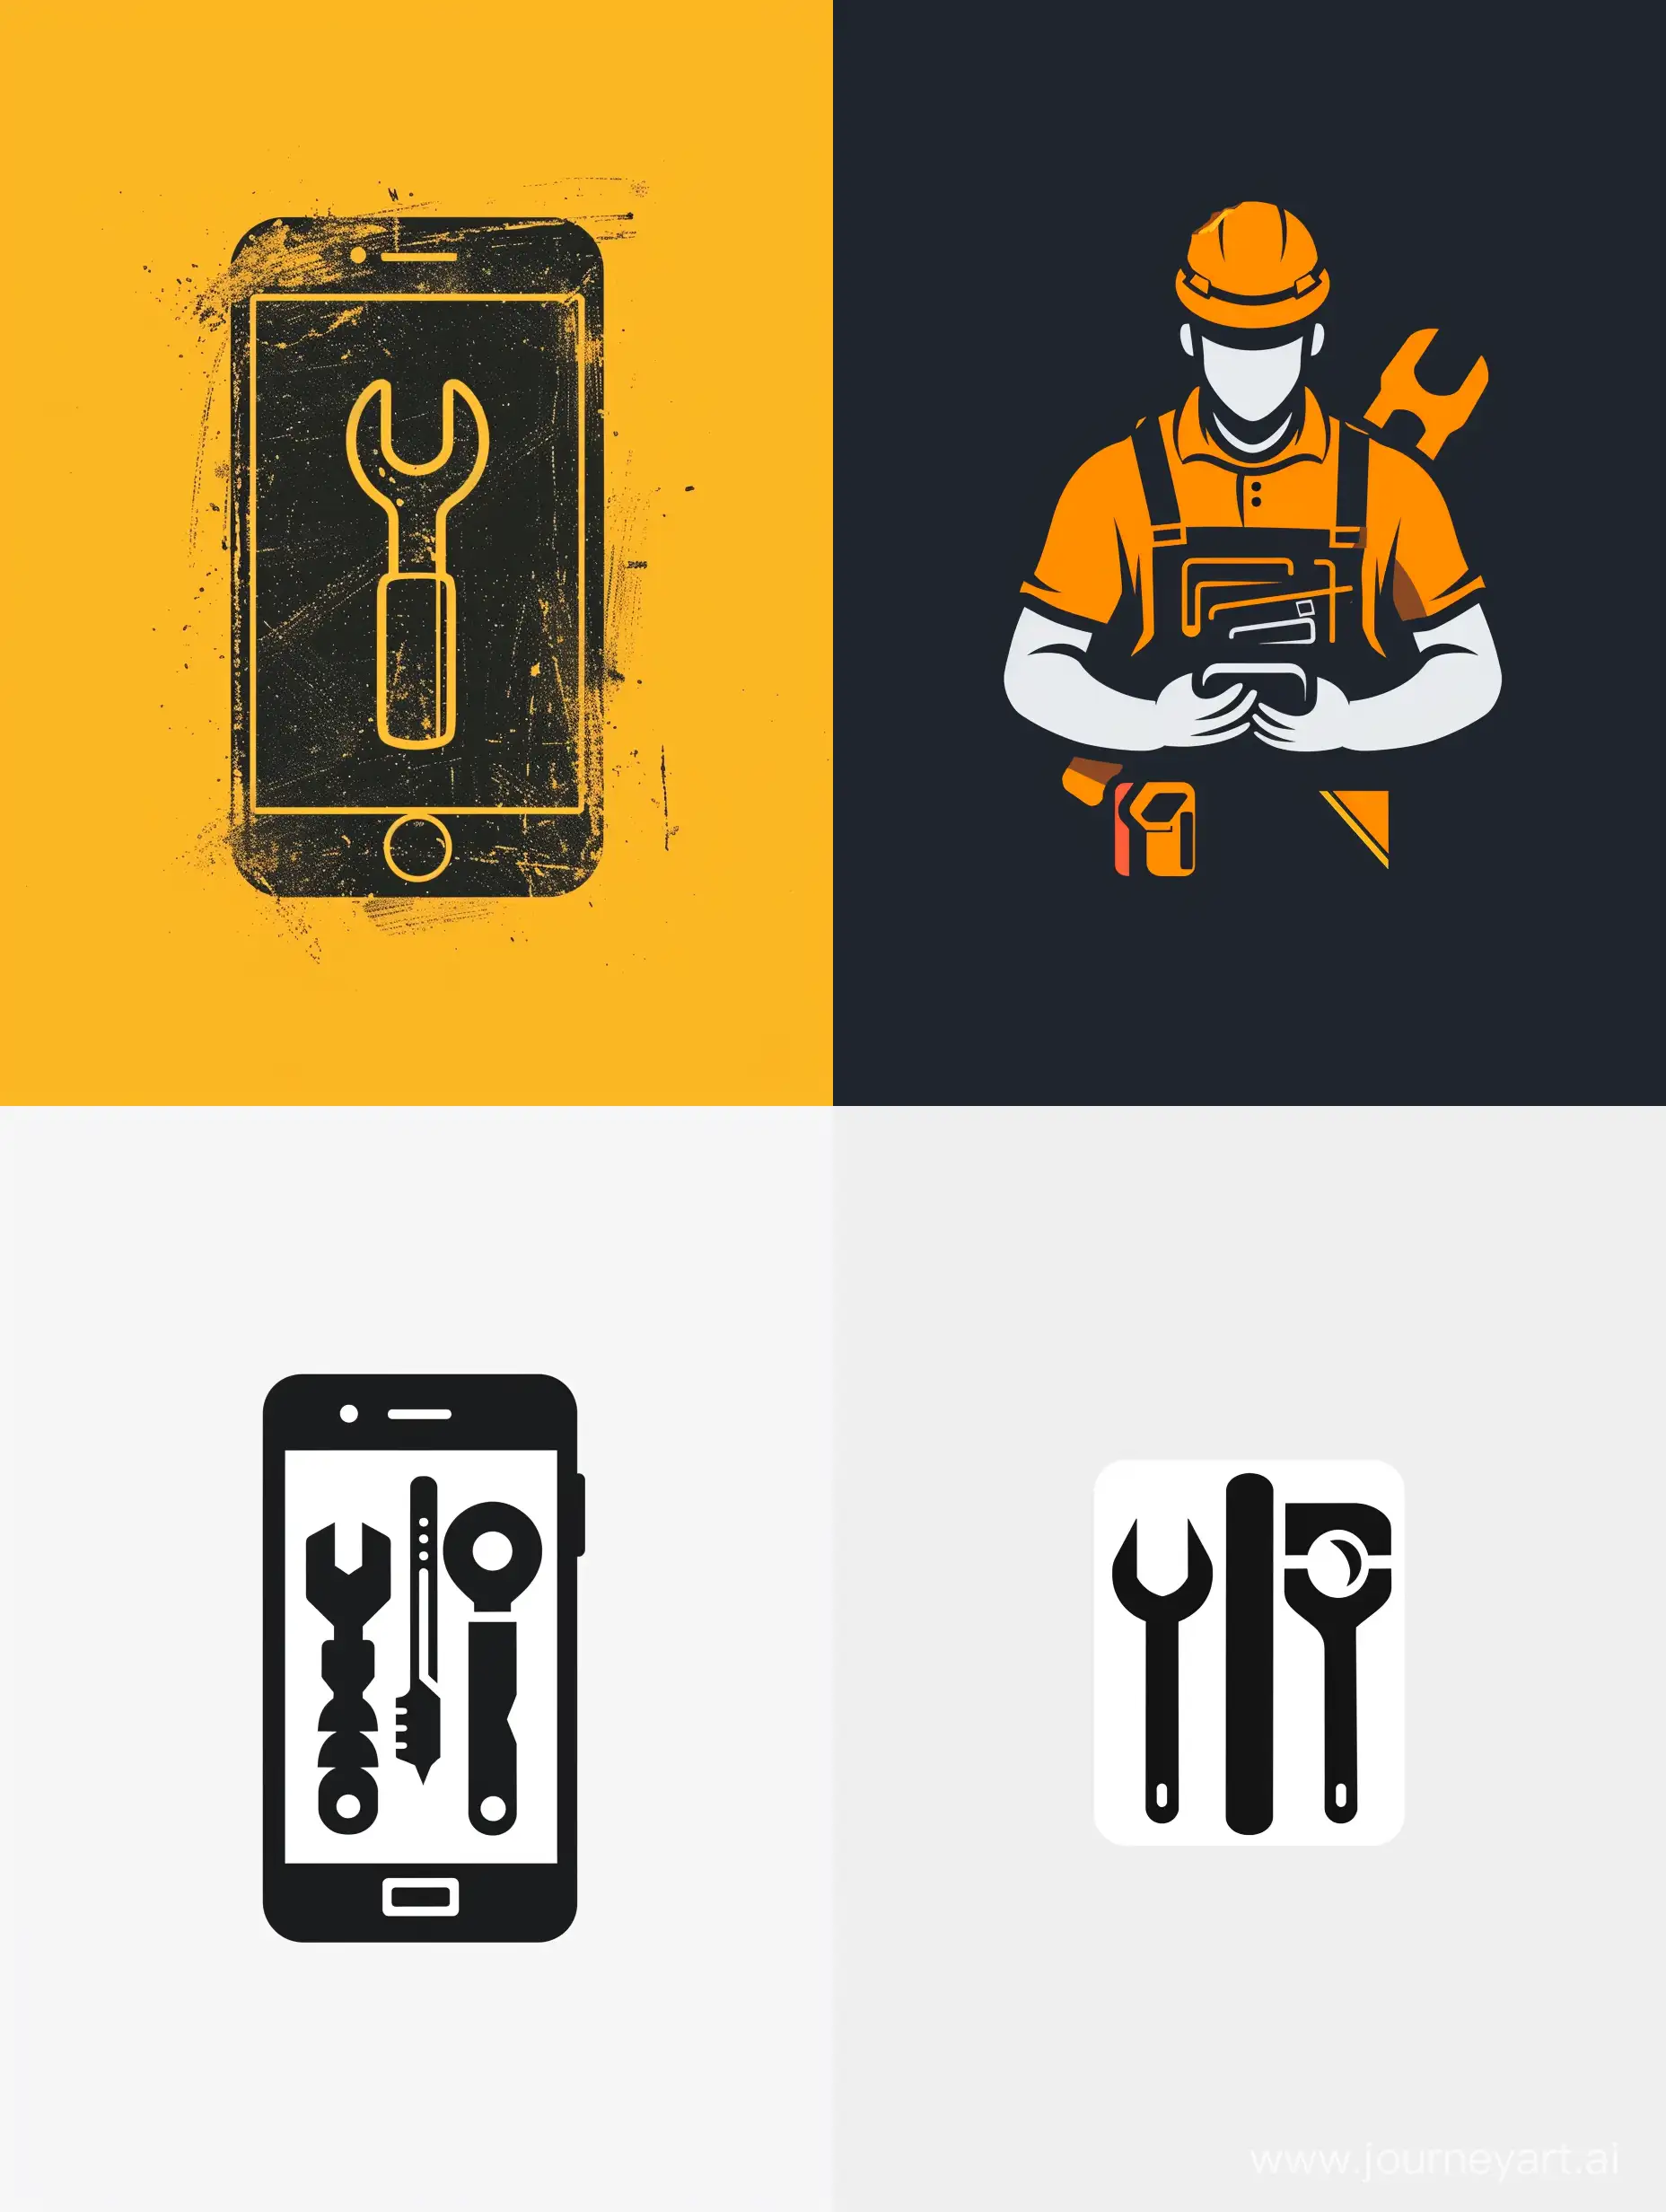 Mobile-Repair-Logo-Design-with-Smartphone-and-Wrench